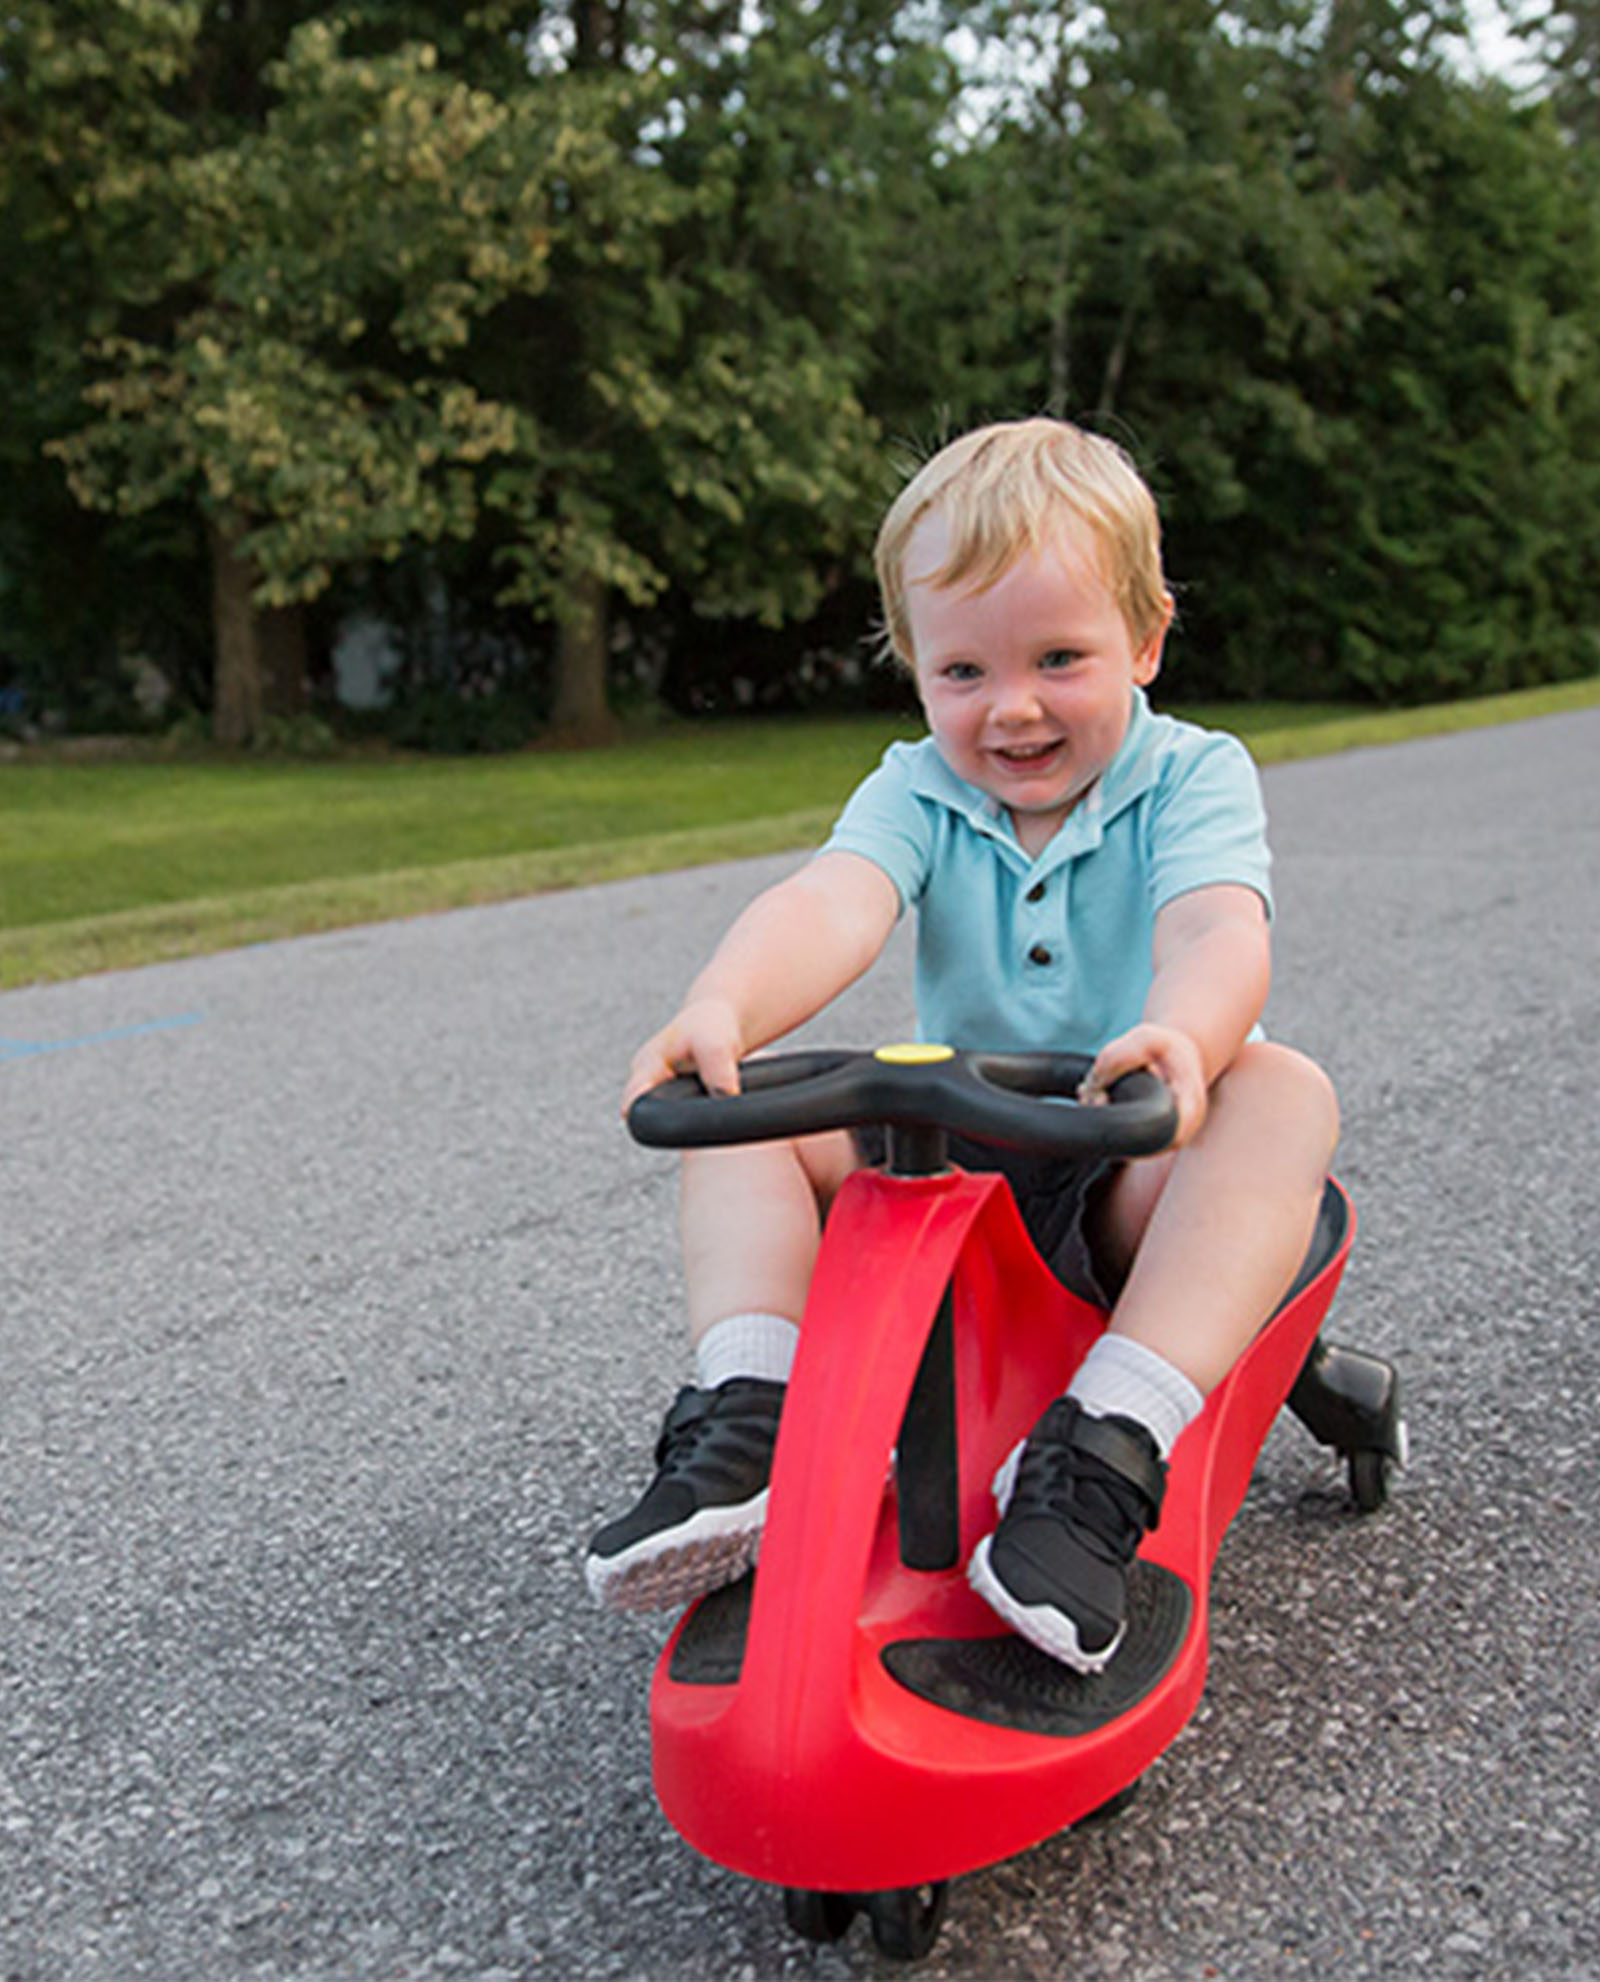 Ages 3 yrs and Up Turn gears Red No batteries Ride On Toy Wiggle for endless fun The Original PlasmaCar by PlaSmart Twist or pedals 